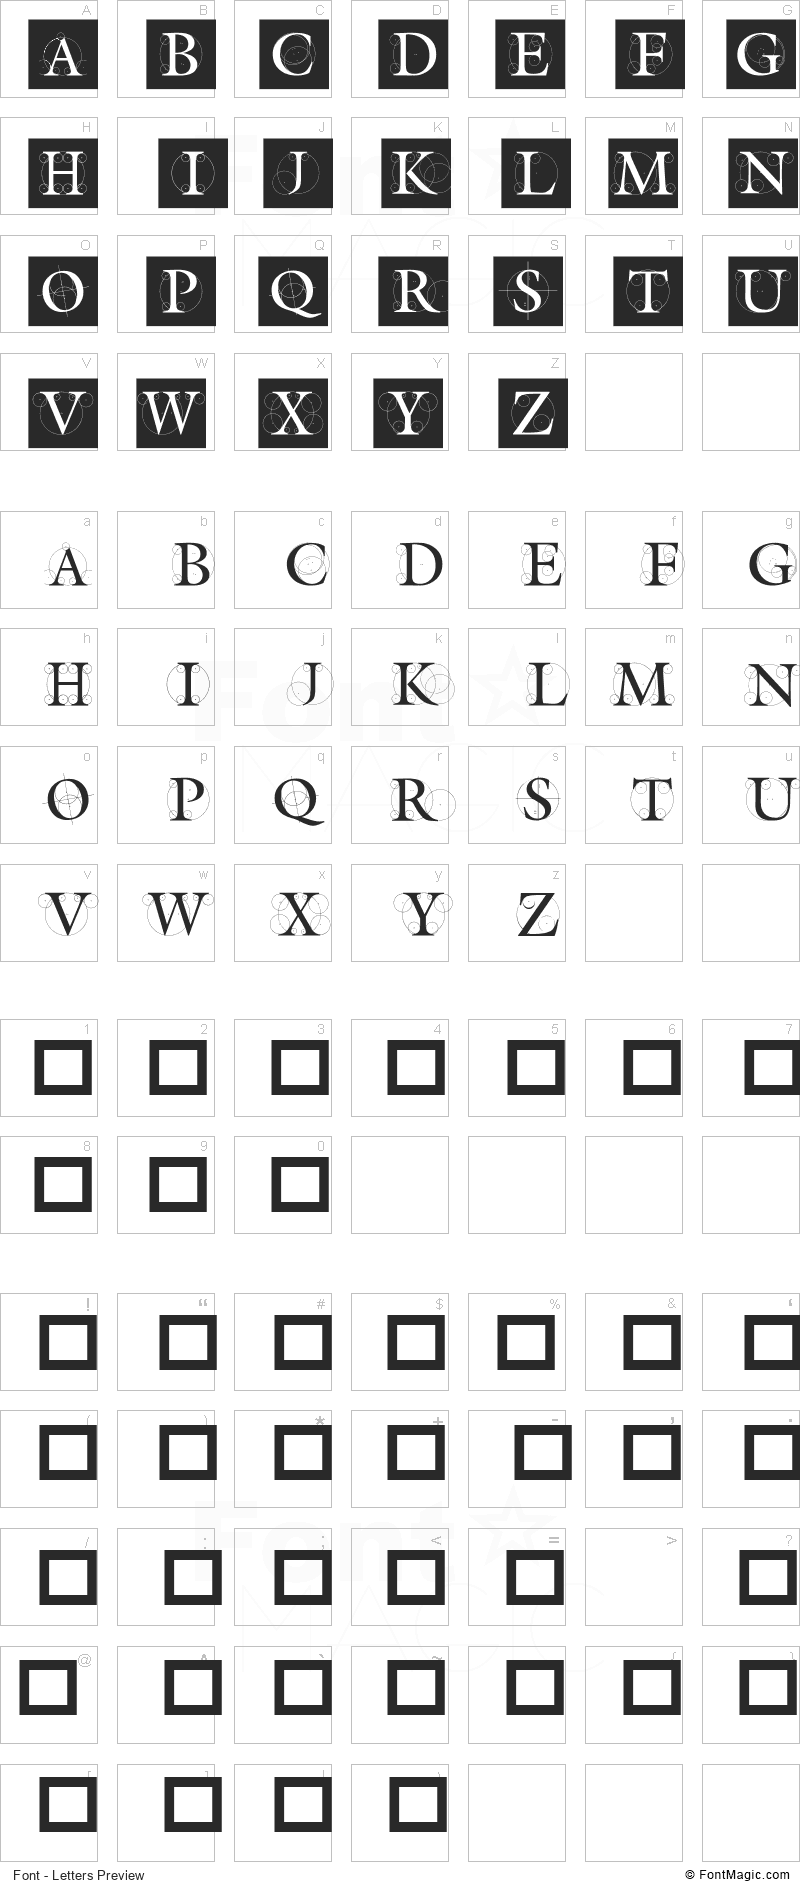 The Roots Font - All Latters Preview Chart